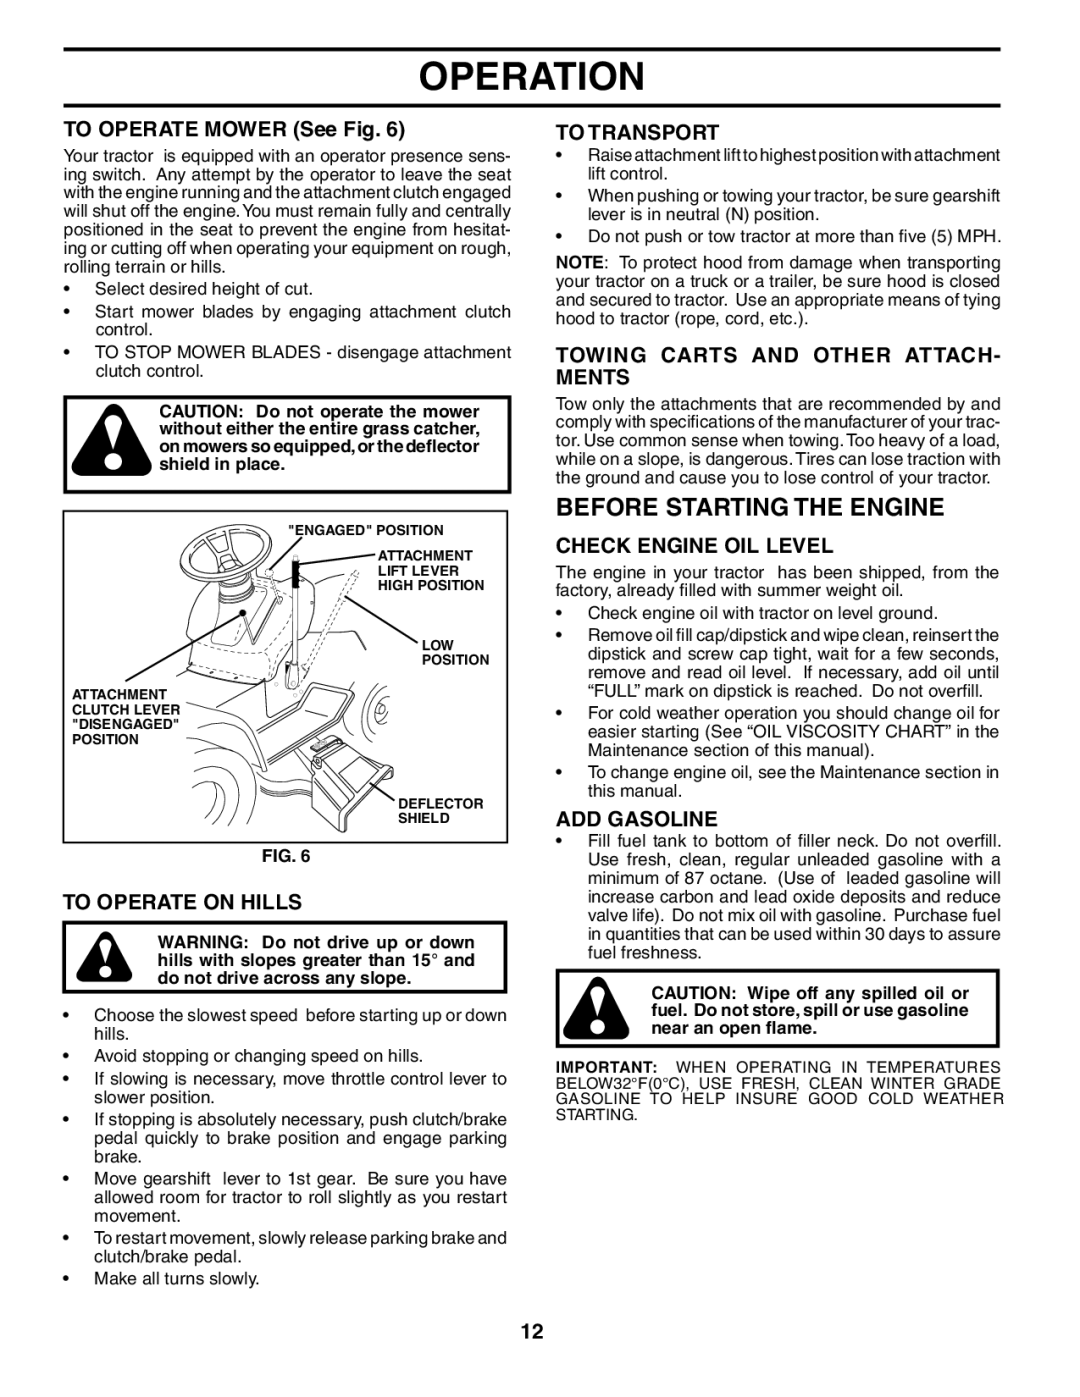 Poulan 190781 manual Before Starting the Engine 